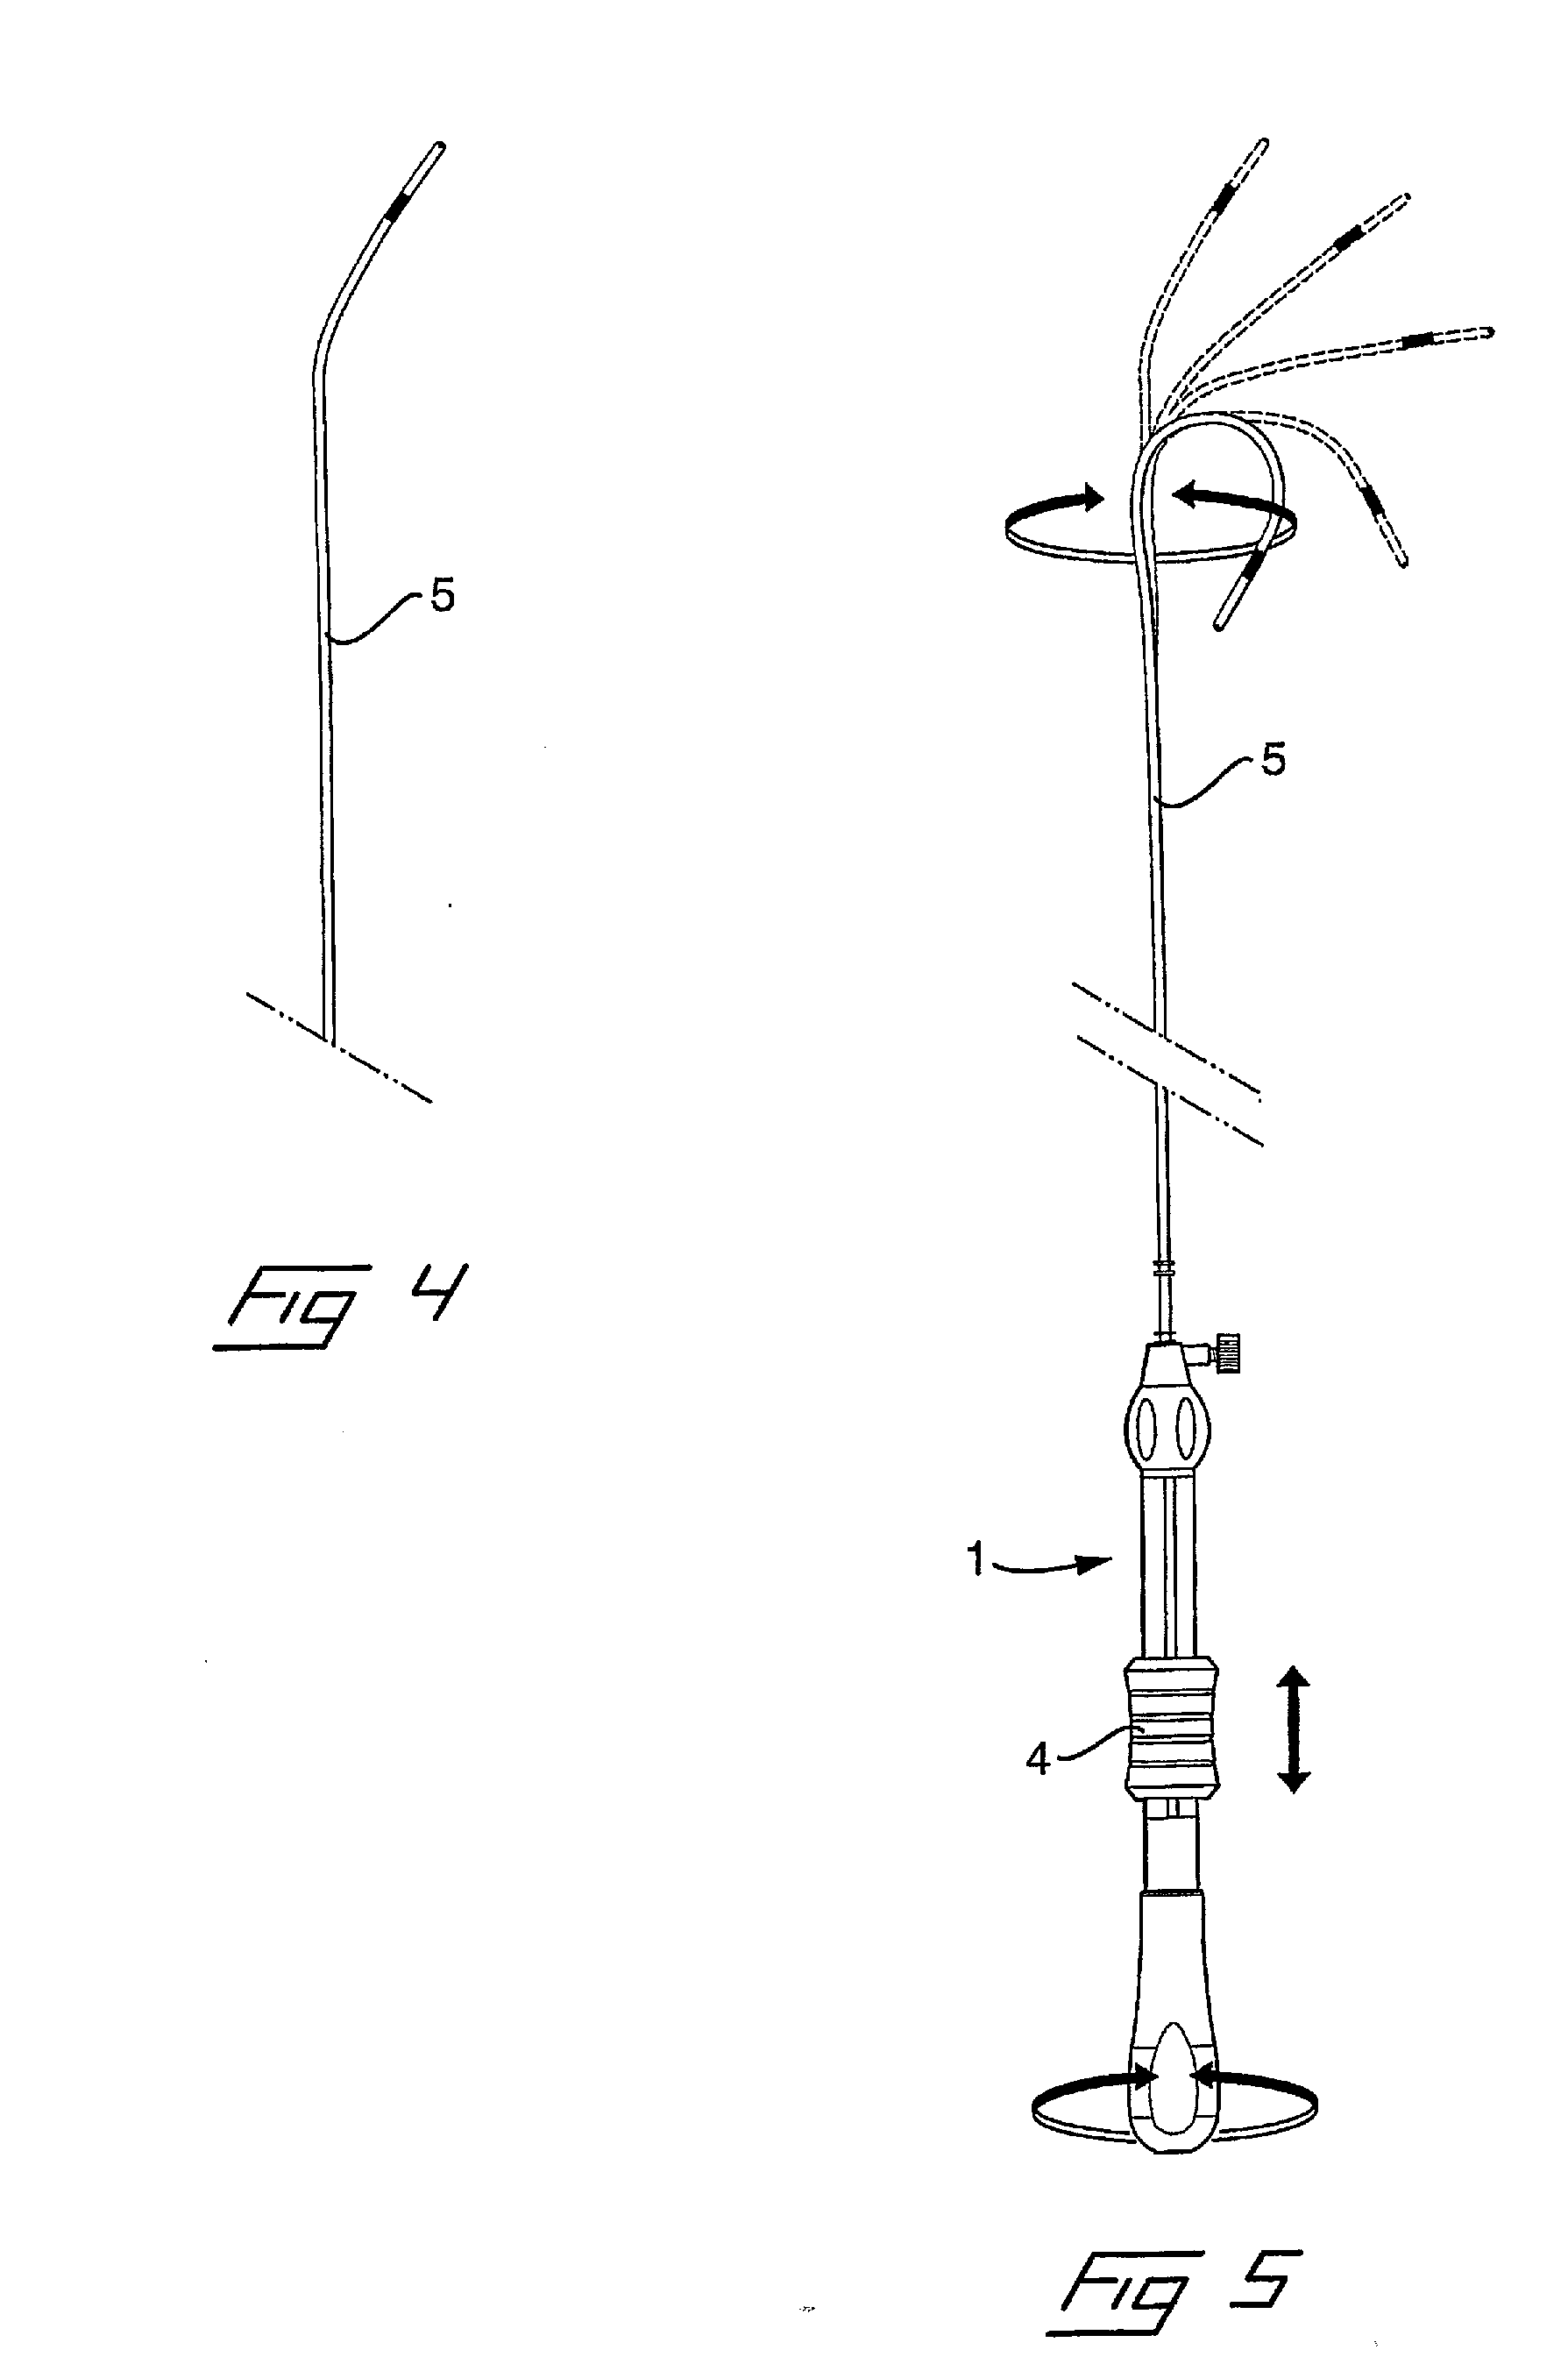 Steerable stylet for an implantable medical lead, and method for manufacture thereof